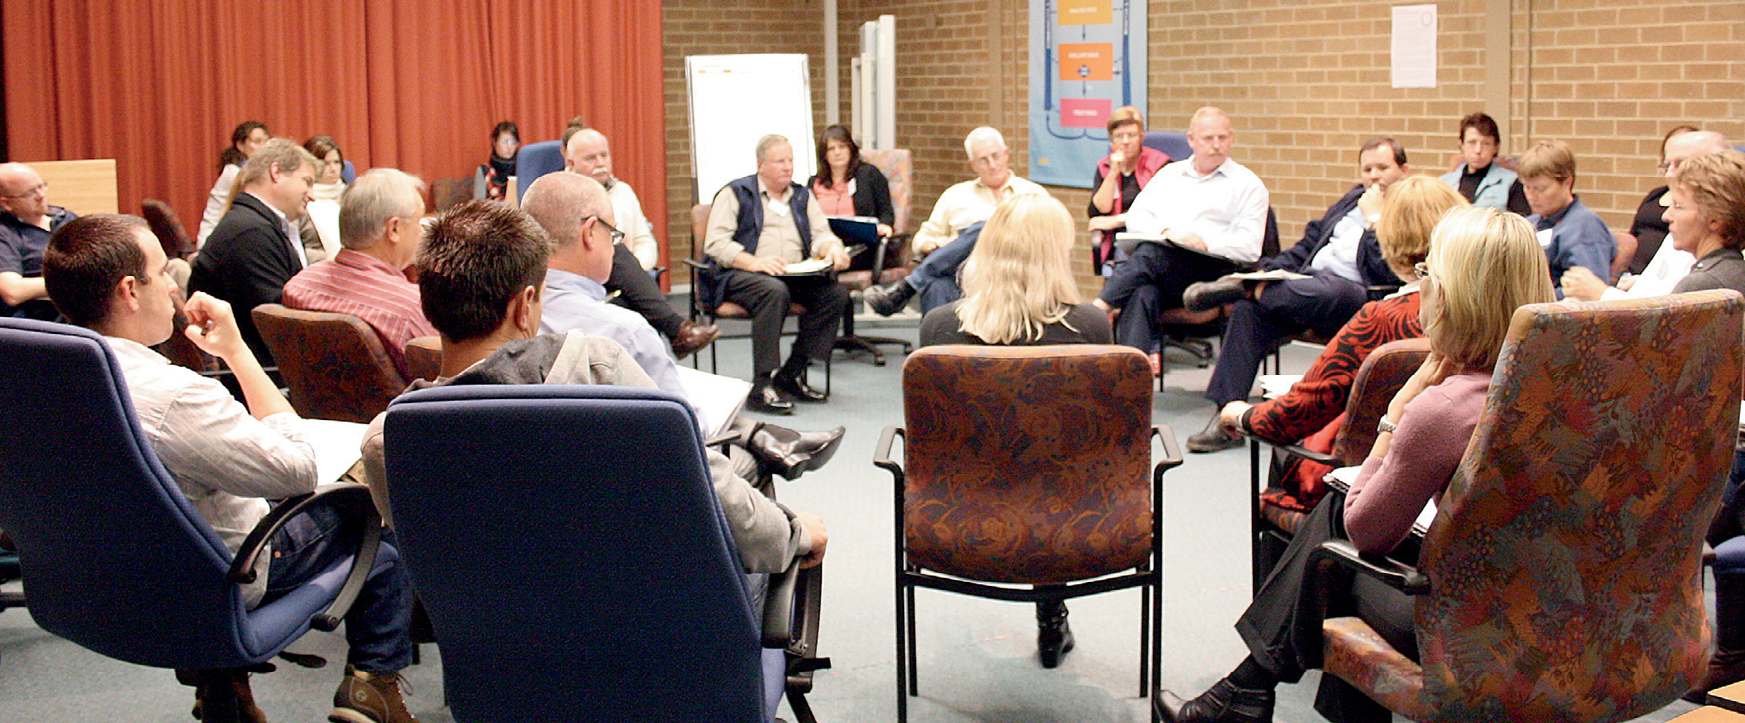 Photograph of people sitting in a large circle facing each other, discussing community engagement on the topic of hazards and disasters.